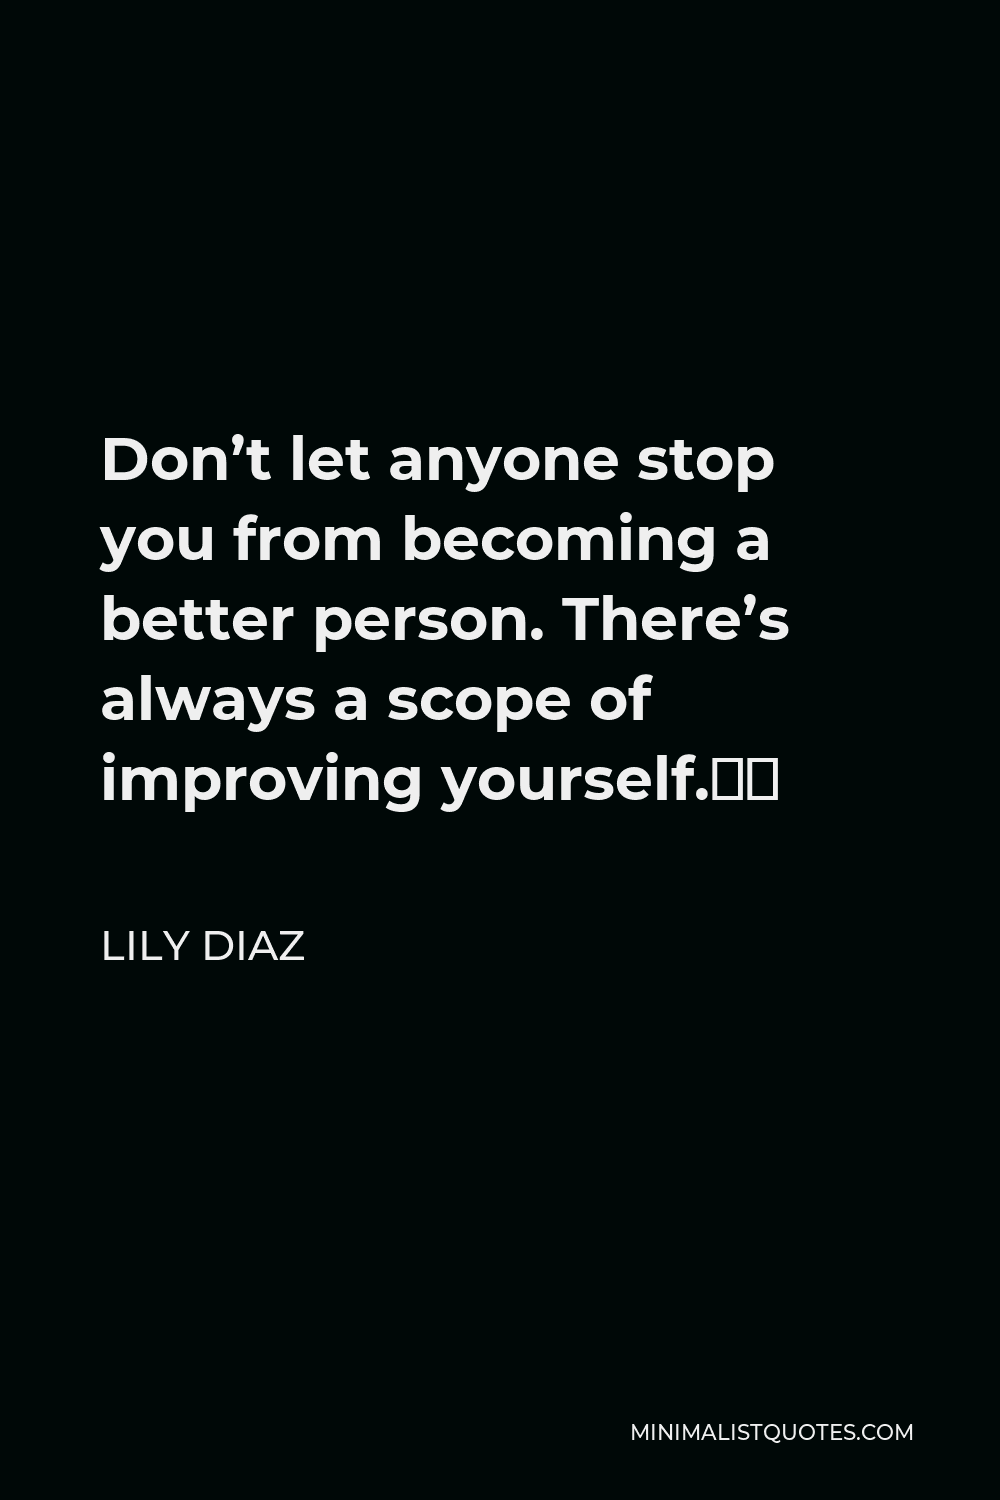 Lily Diaz Quote - Don’t let anyone stop you from becoming a better person. There’s always a scope of improving yourself.⁣